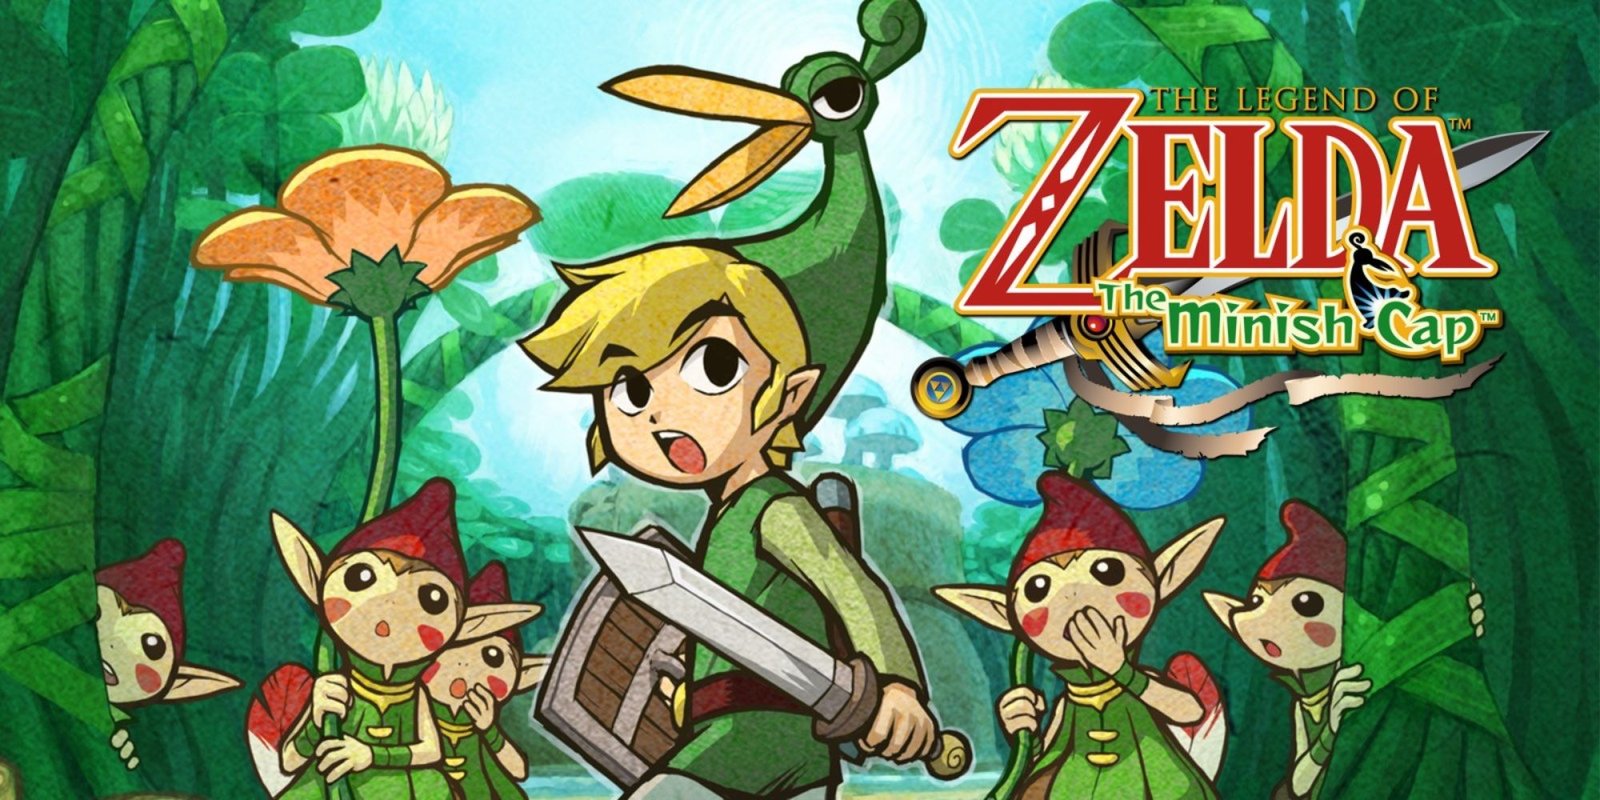 Minish cap: Cover of the game featuring Link wearing his cap